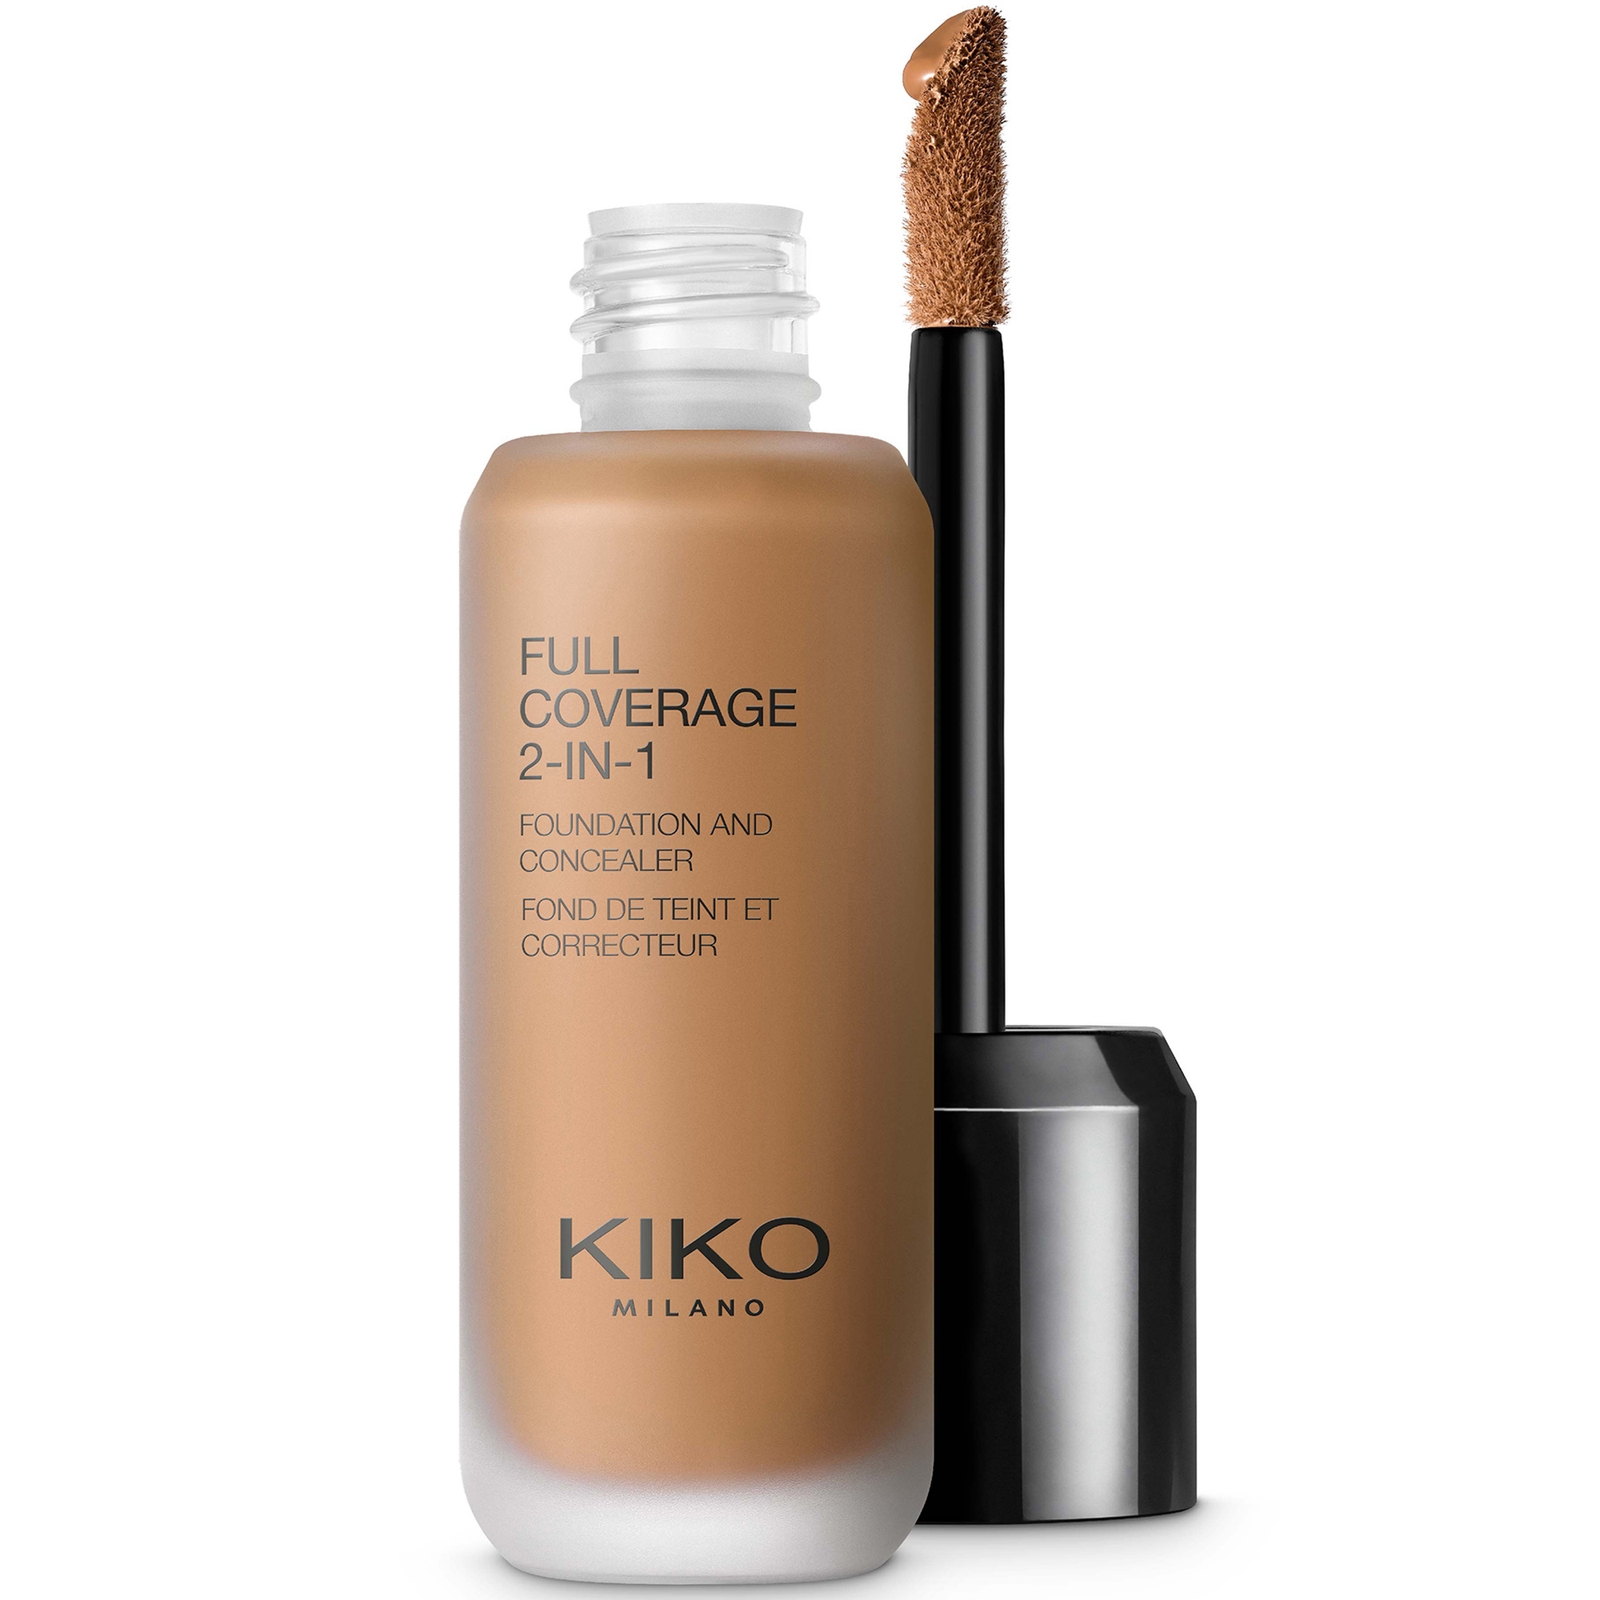 KIKO Milano Full Coverage 2-in-1 Foundation and Concealer 25ml (Various Shades) - 120 Warm Beige